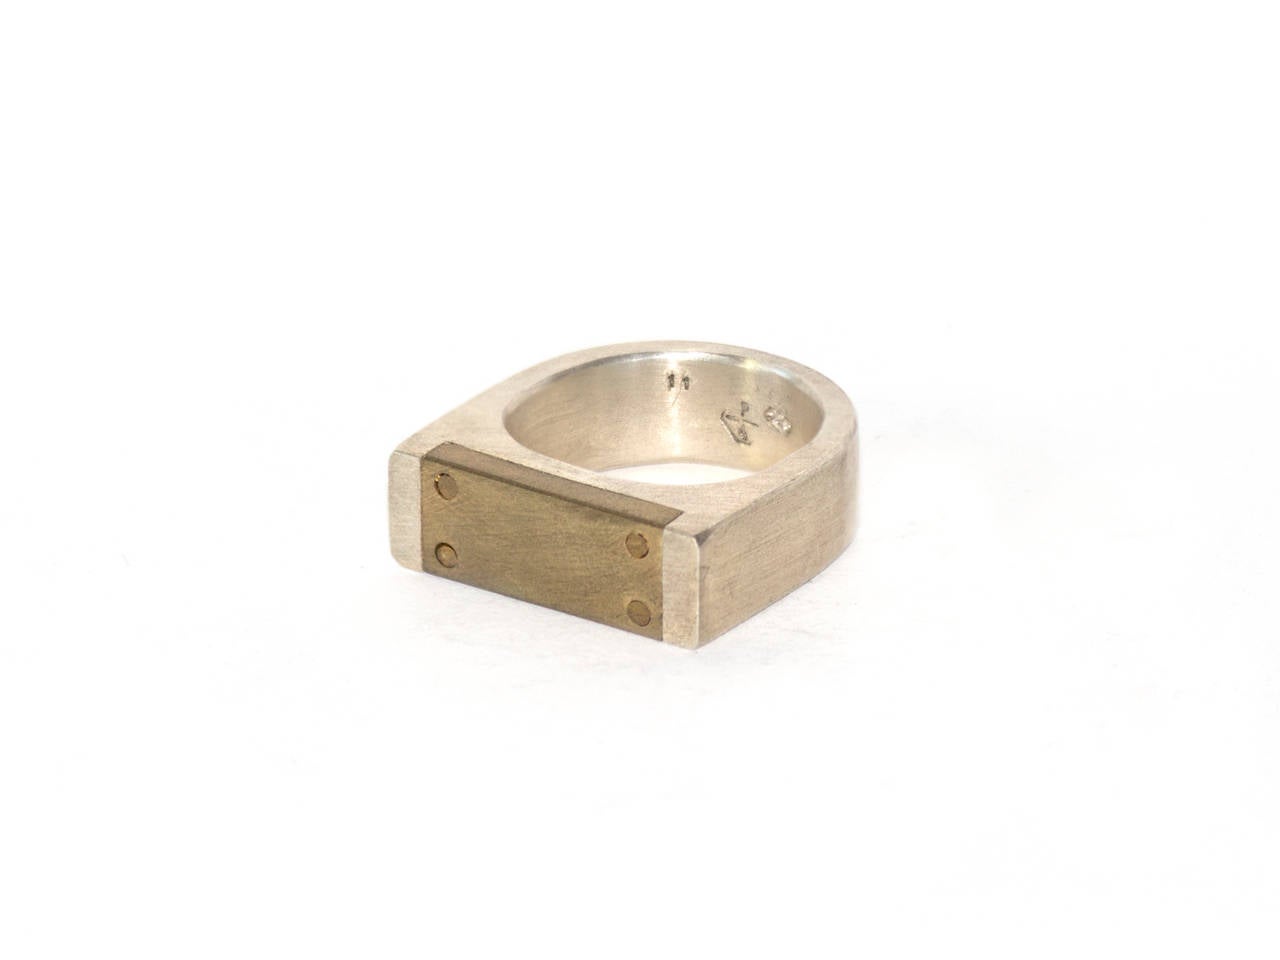 Single plate ring in matte sterling silver and matte brass by P/4.

Size: 11